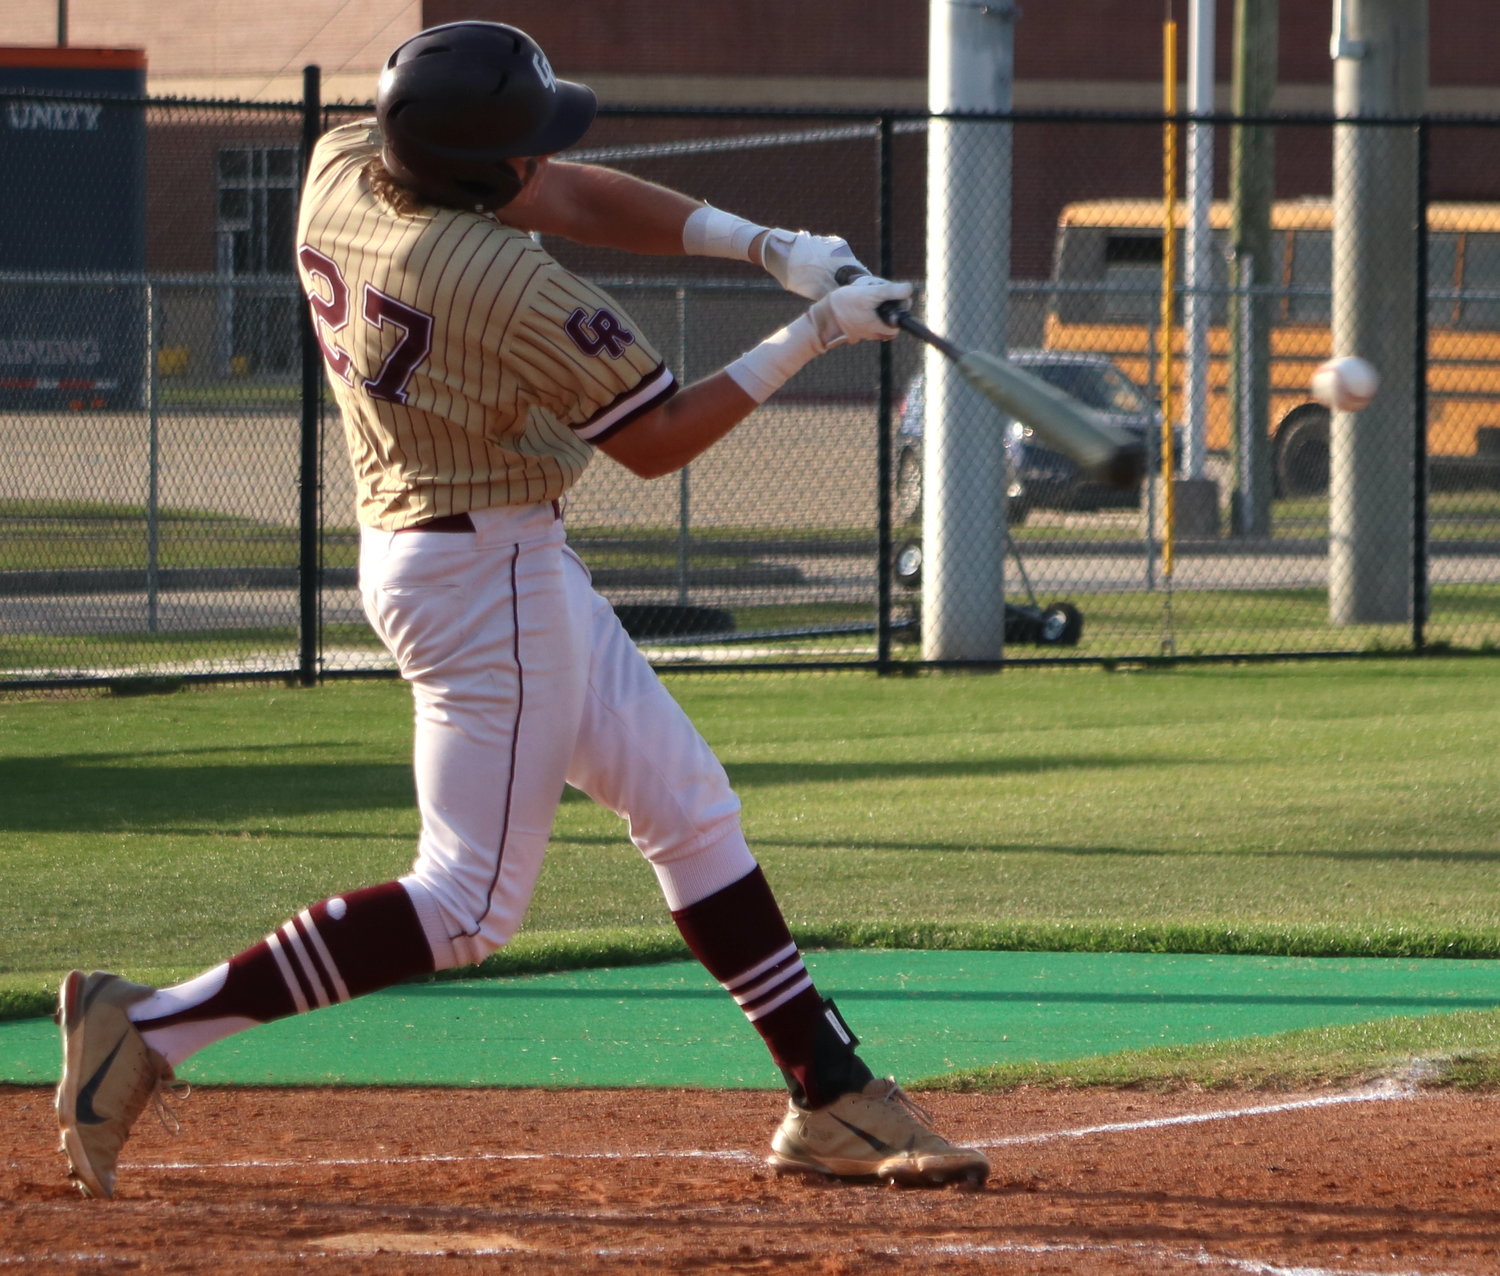 TJ Hughes bats during Friday’s District 19-6A  game between Seven Lakes and Cinco Ranch at the Seven Lakes baseball field.